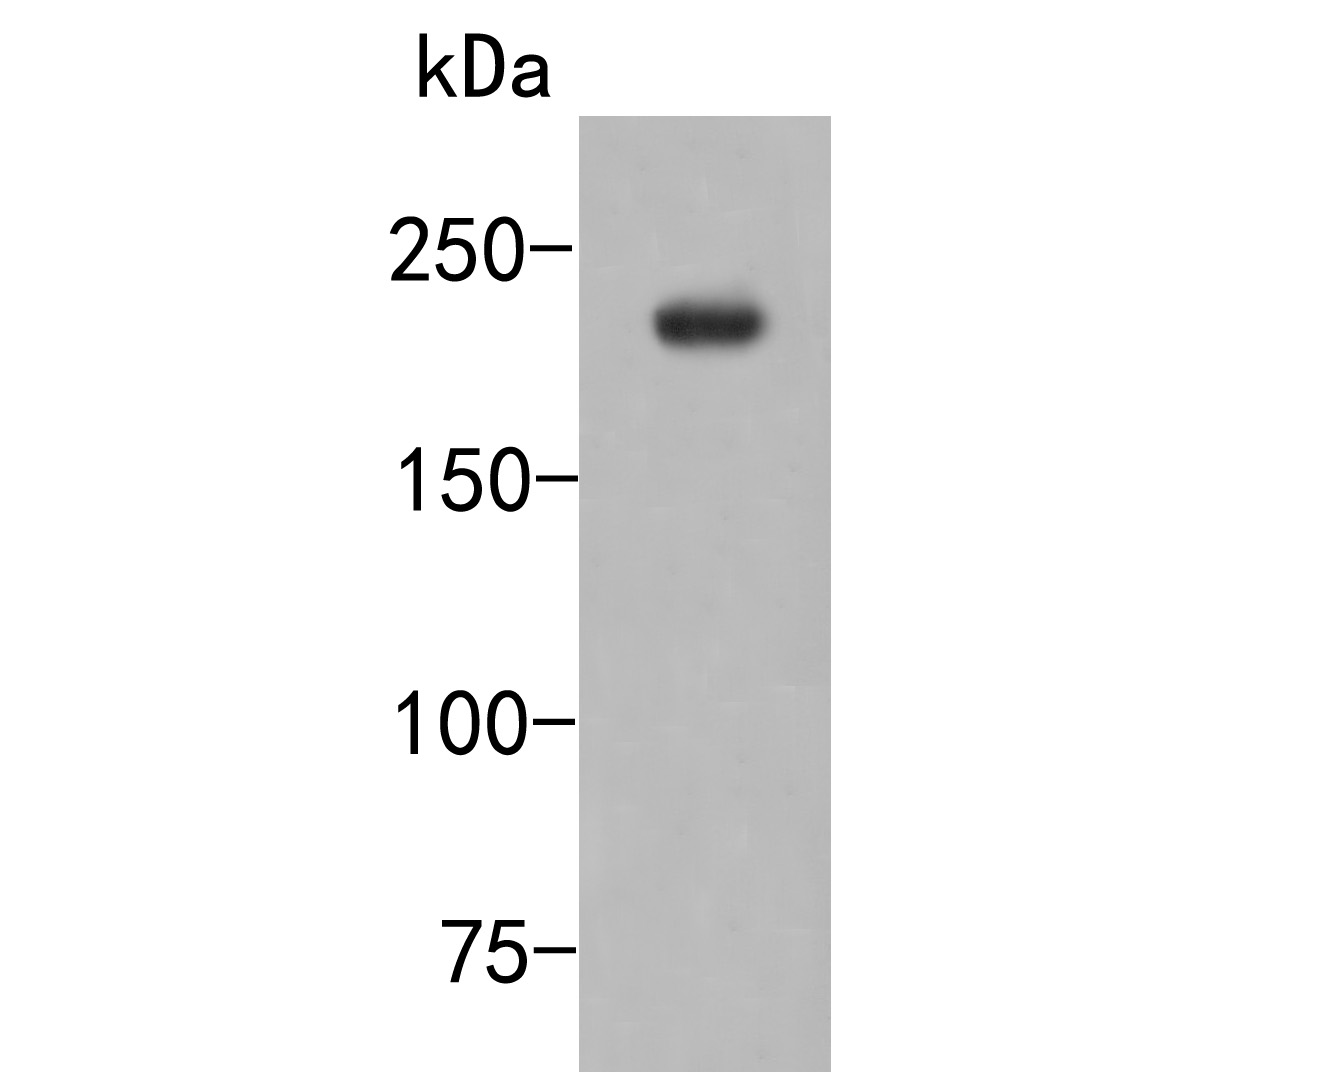 Western blot analysis of CNOT1 on rat brain tissue lysates. Proteins were transferred to a PVDF membrane and blocked with 5% NFDM/TBST for 1 hour at room temperature. The primary antibody (HA500466, 1/500) was used in 5% NFDM/TBST at room temperature for 2 hours. Goat Anti-Rabbit IgG - HRP Secondary Antibody (HA1001) at 1:200,000 dilution was used for 1 hour at room temperature.